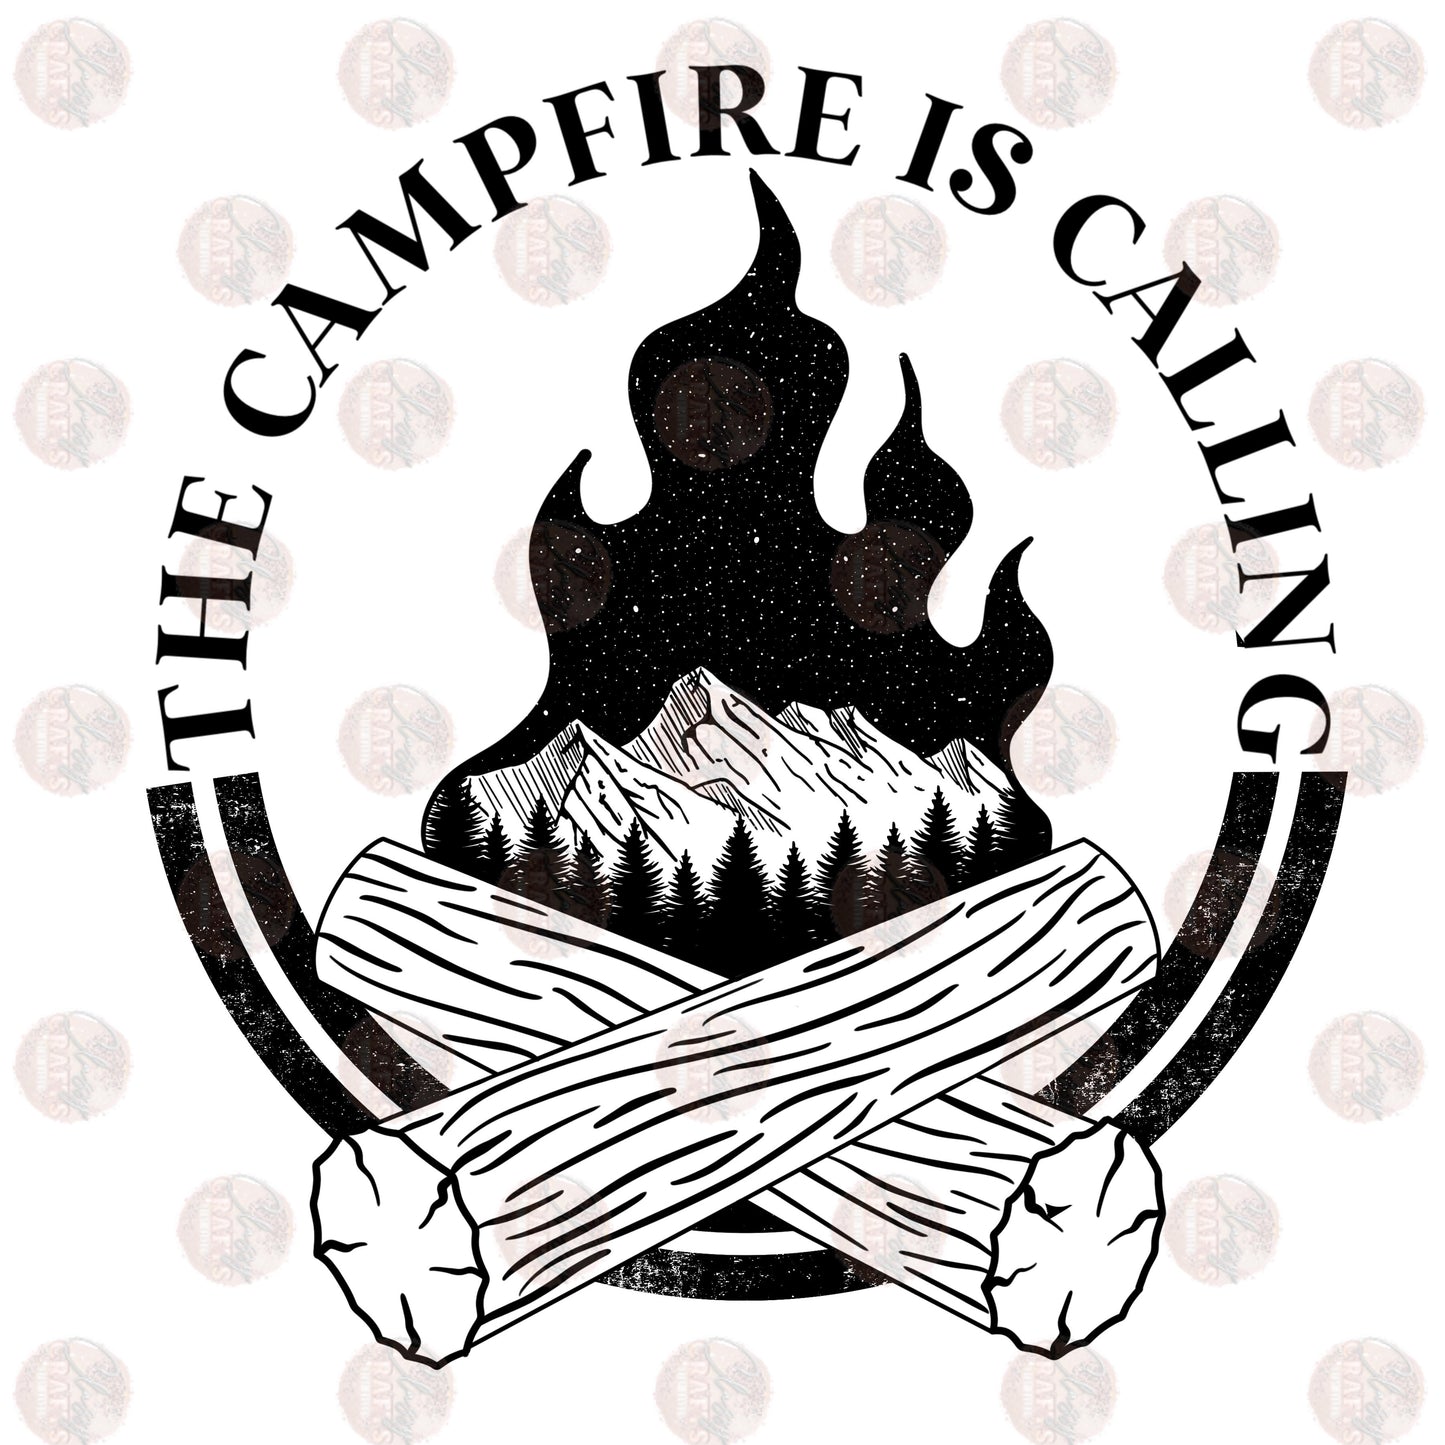 Campfire Calling - Sublimation Transfer